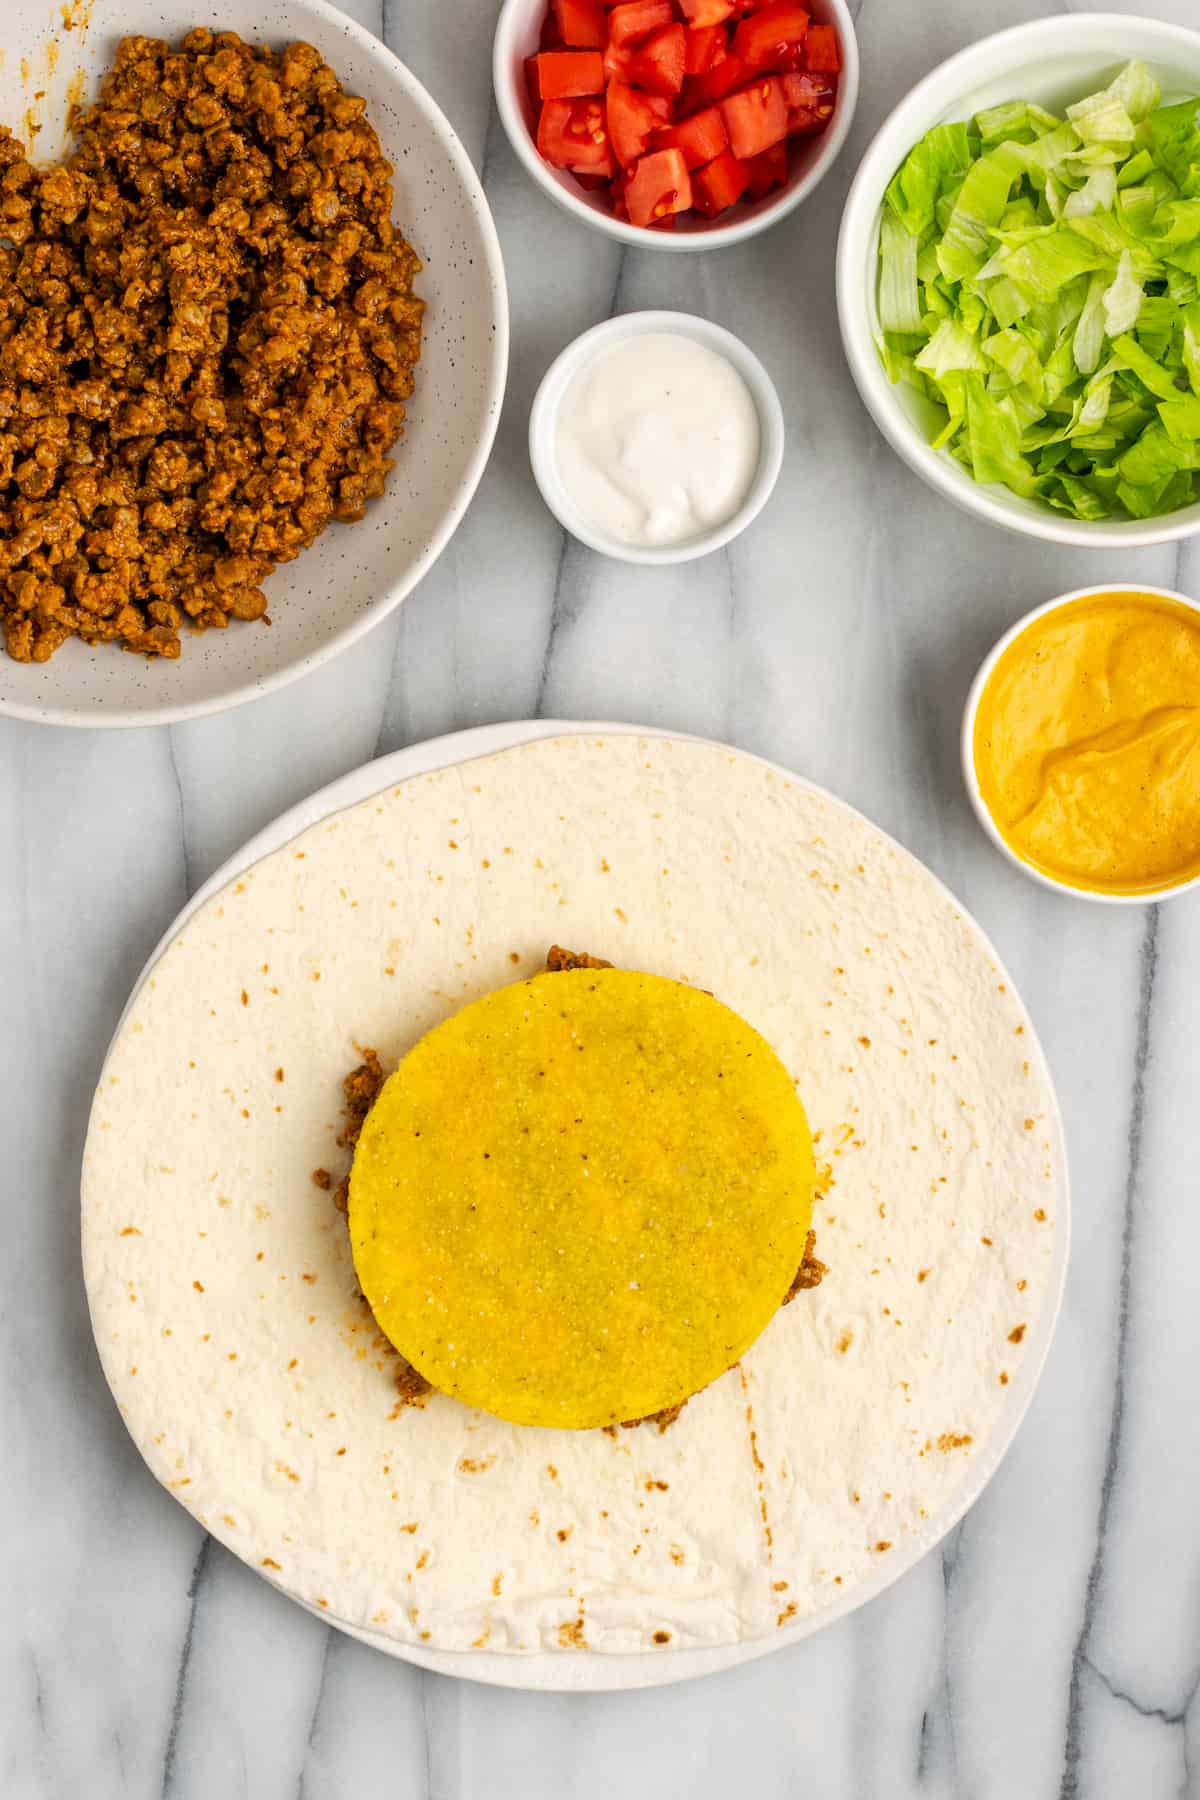 A flour tortilla topped with vegan meat crumbles, vegan cheese sauce, and a tostada, next to bowls of vegan meat crumbles, vegan cheese sauce, vegan sour cream, lettuce, and tomatoes